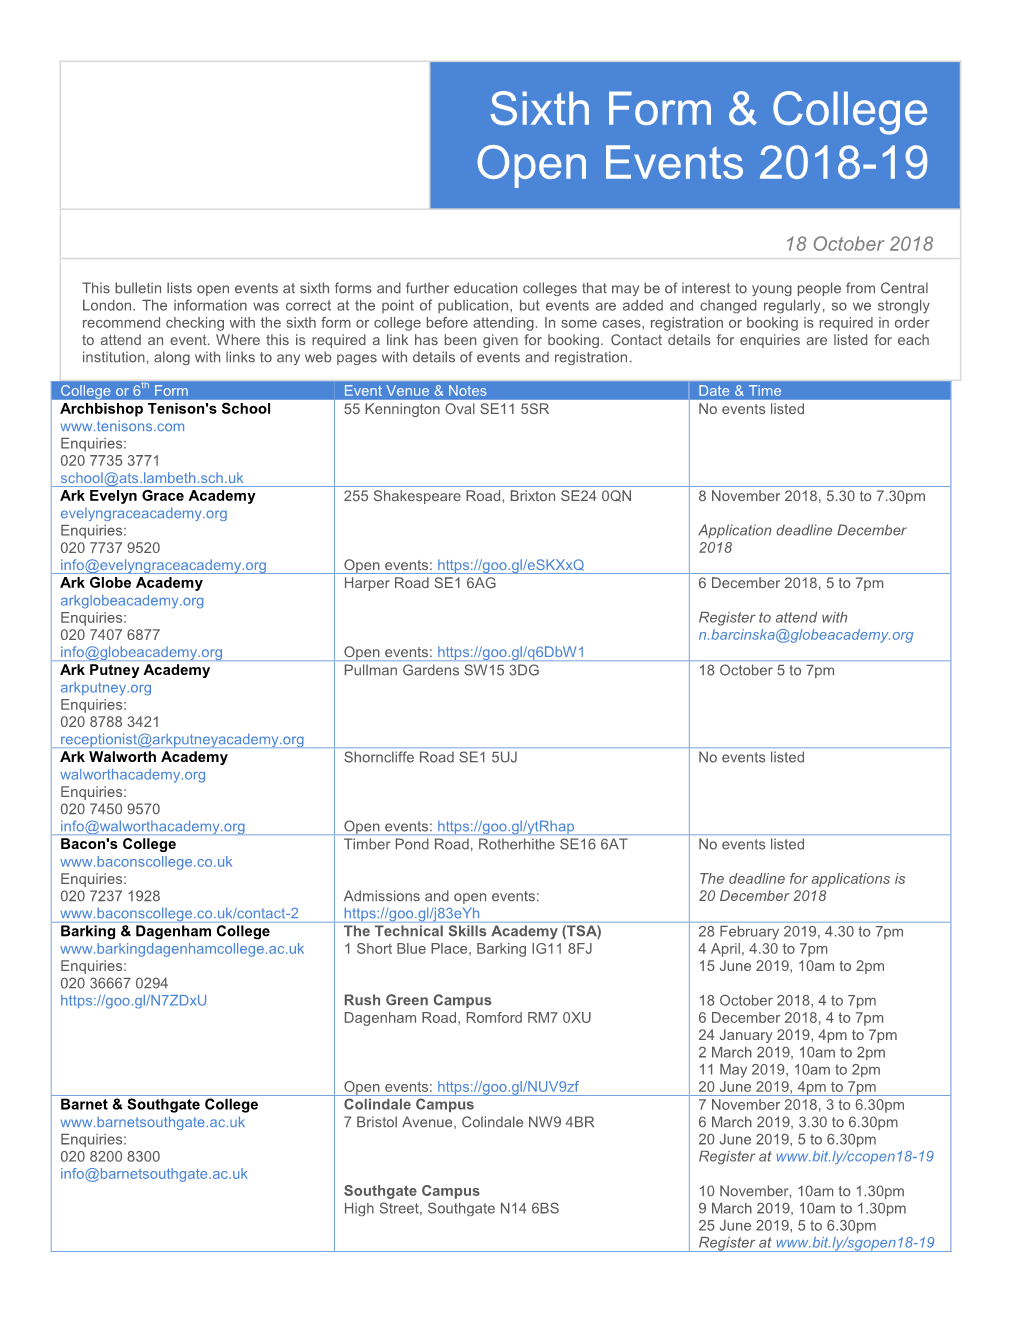 Sixth Form and College Open Events